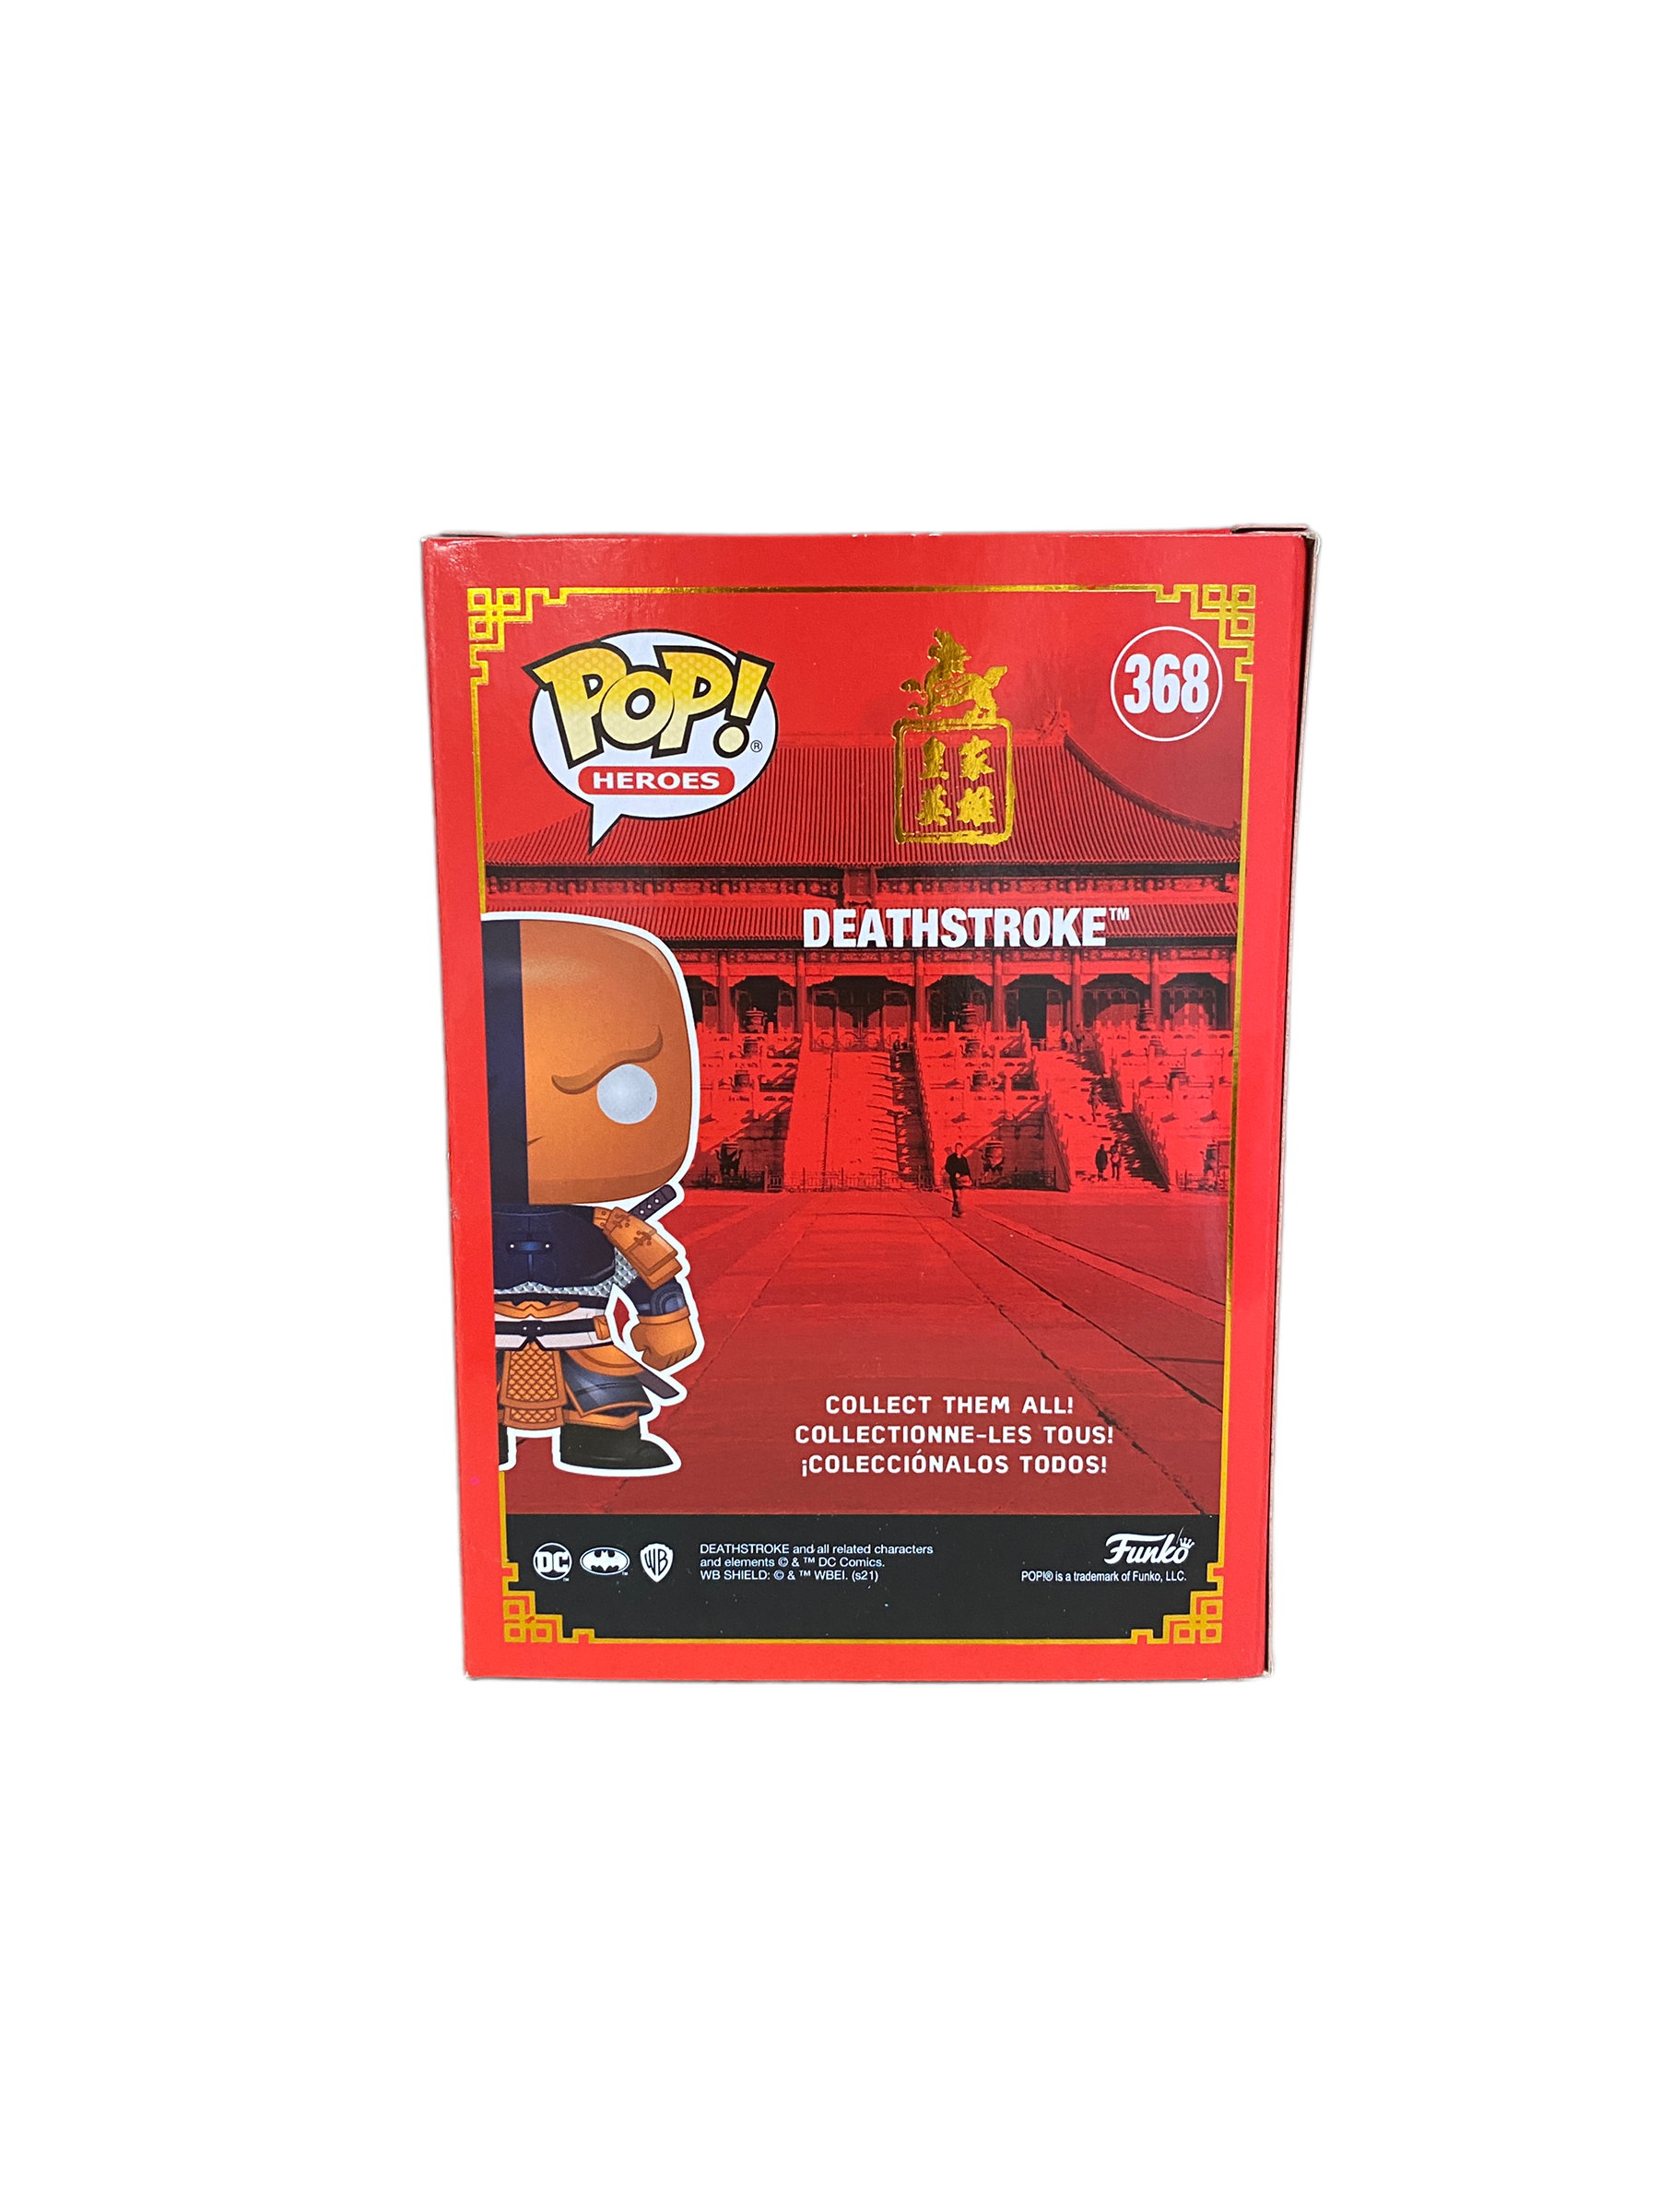 Deathstroke #368 Funko Pop! - DC Imperial Palace - Virtual Funkon 2021 Official Convention Exclusive - Condition 9.5/10